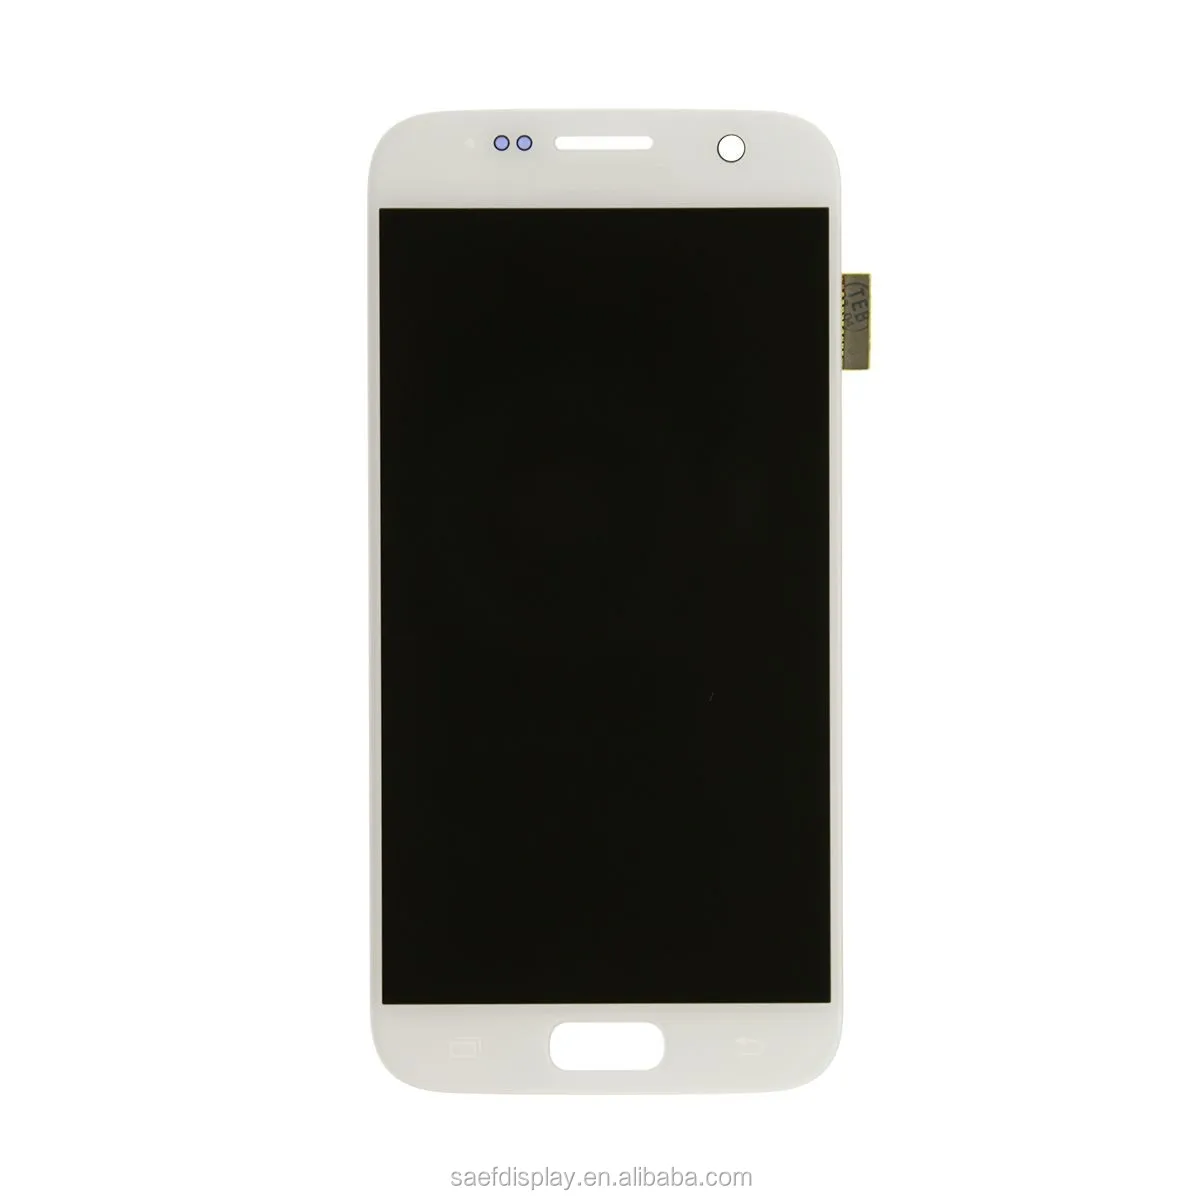 

S7 SM-G930 original super amoled Display Touch Screen Digitizer Assembly for Samsung Galaxy S7 SM-G930, Black white gold